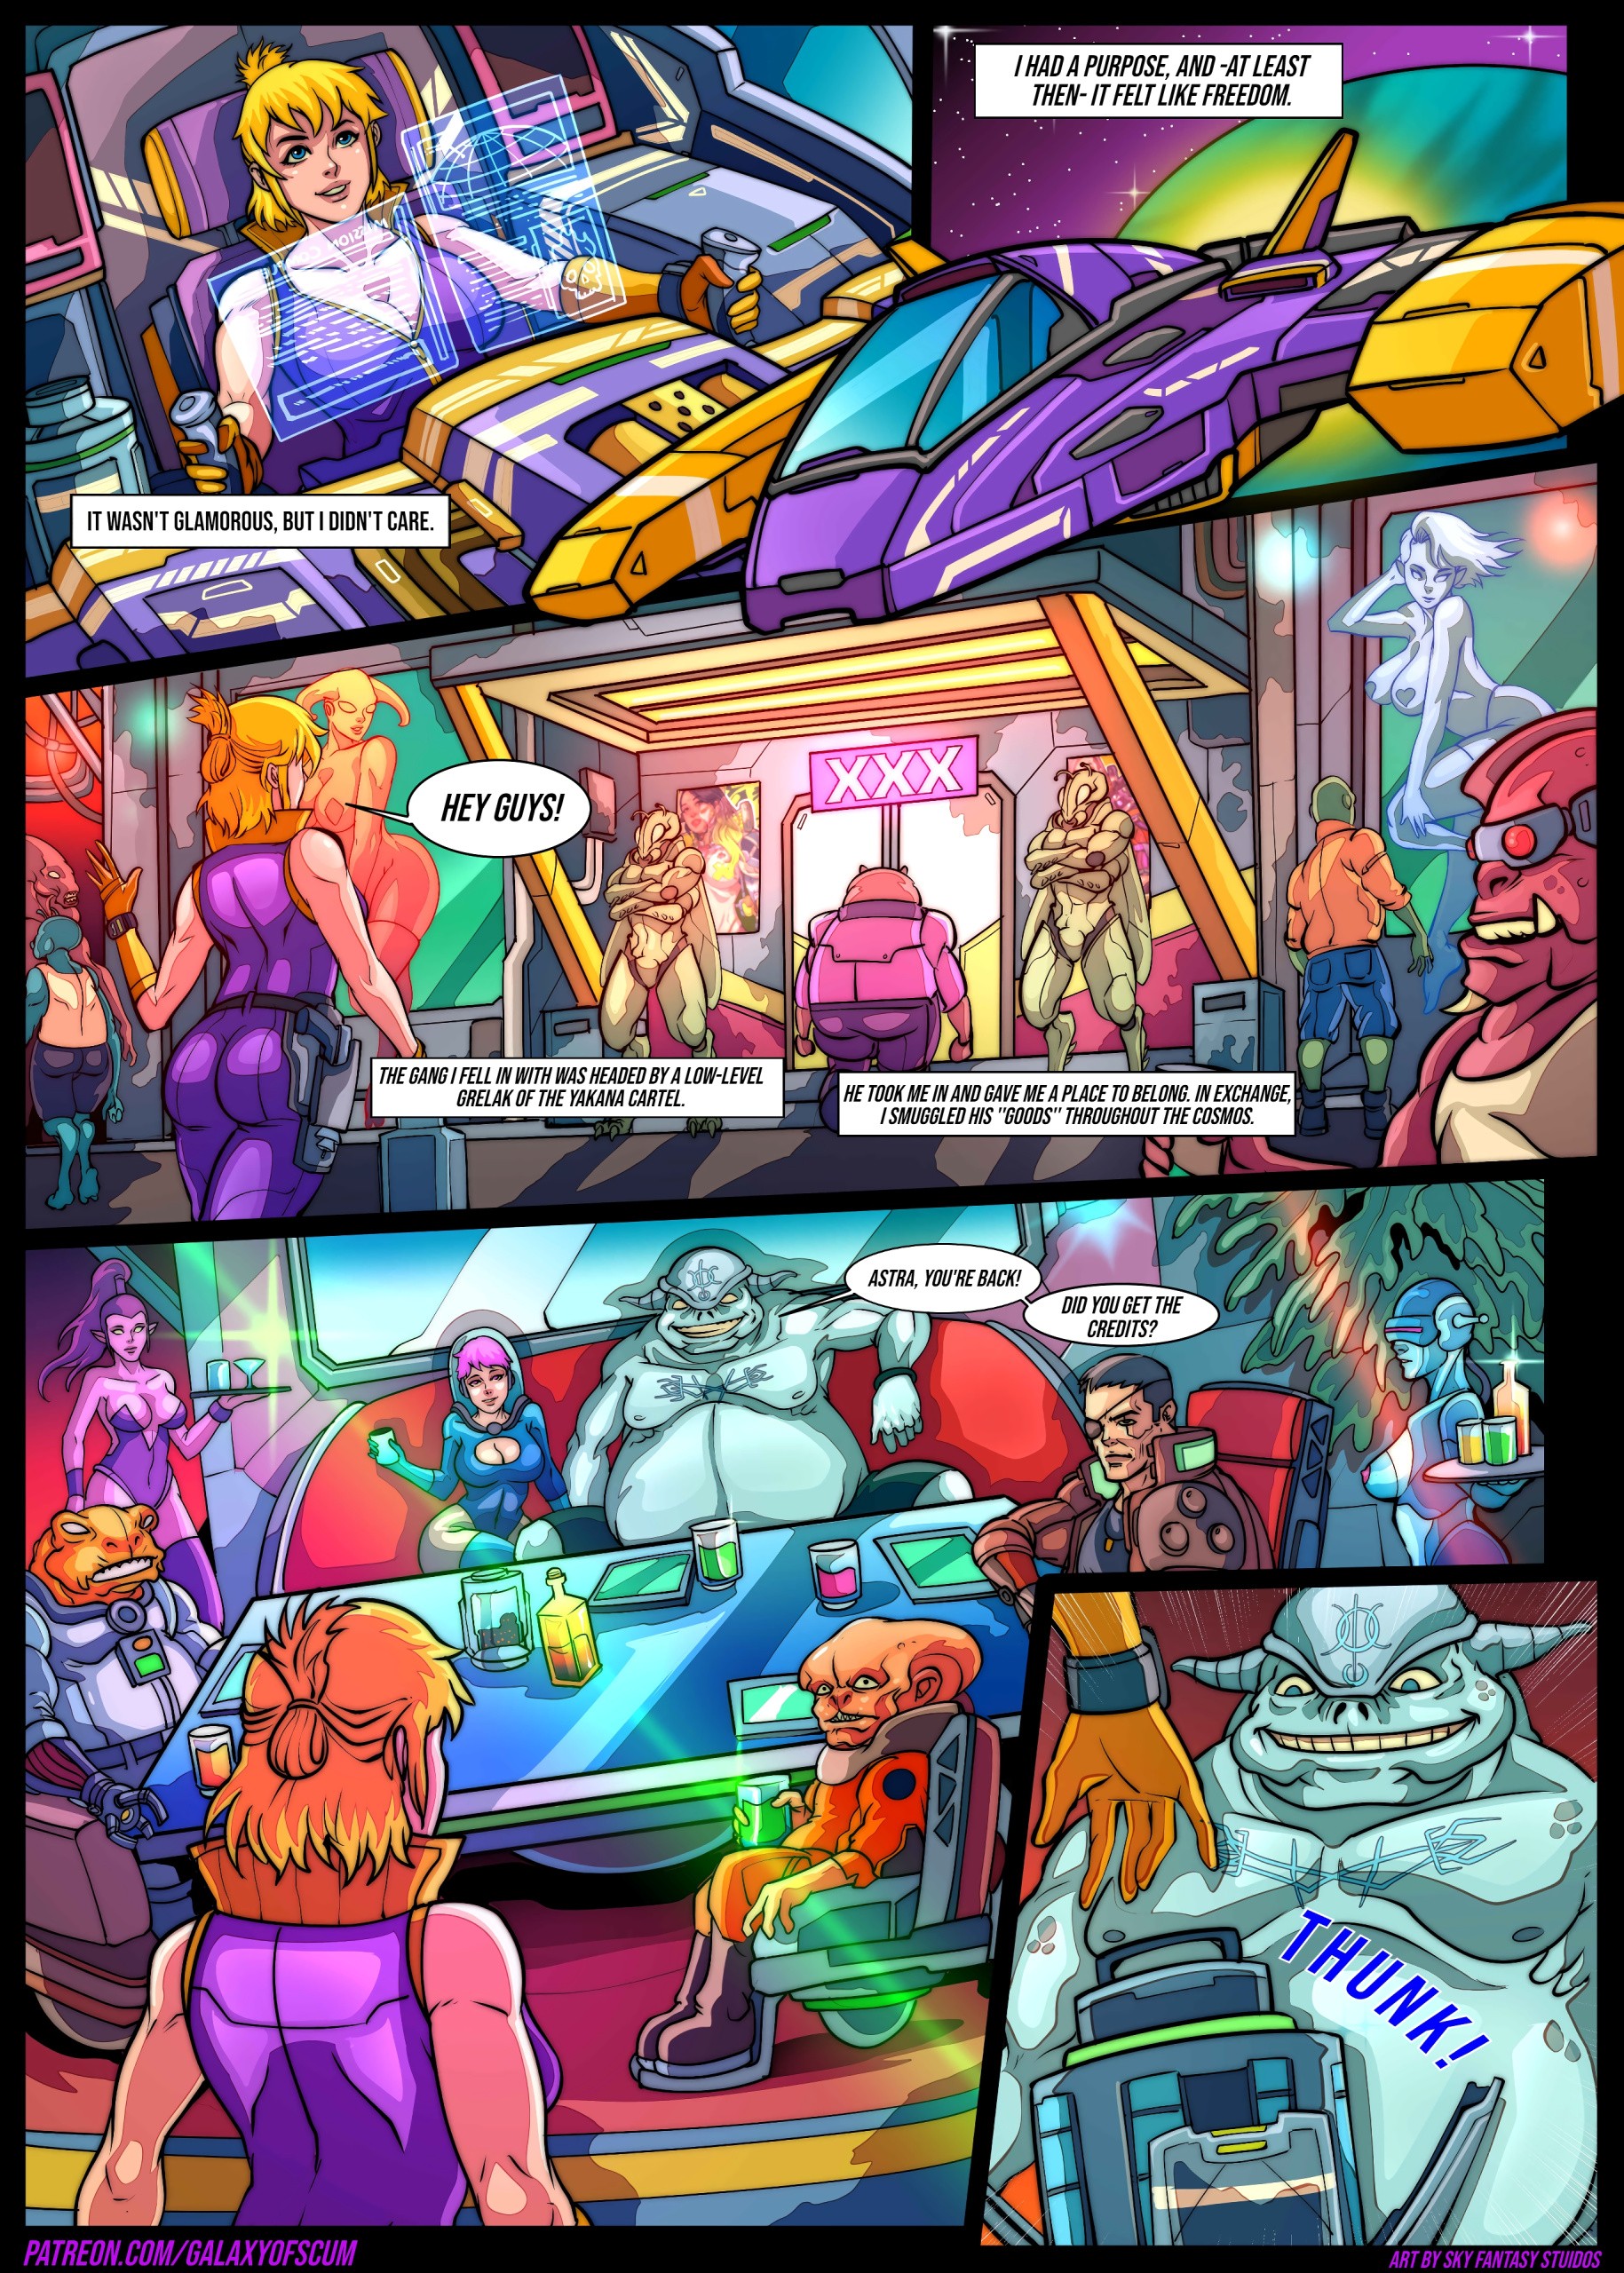 Galaxy of Scum Issue 2: Smuggler's and Bugs porn comic picture 5